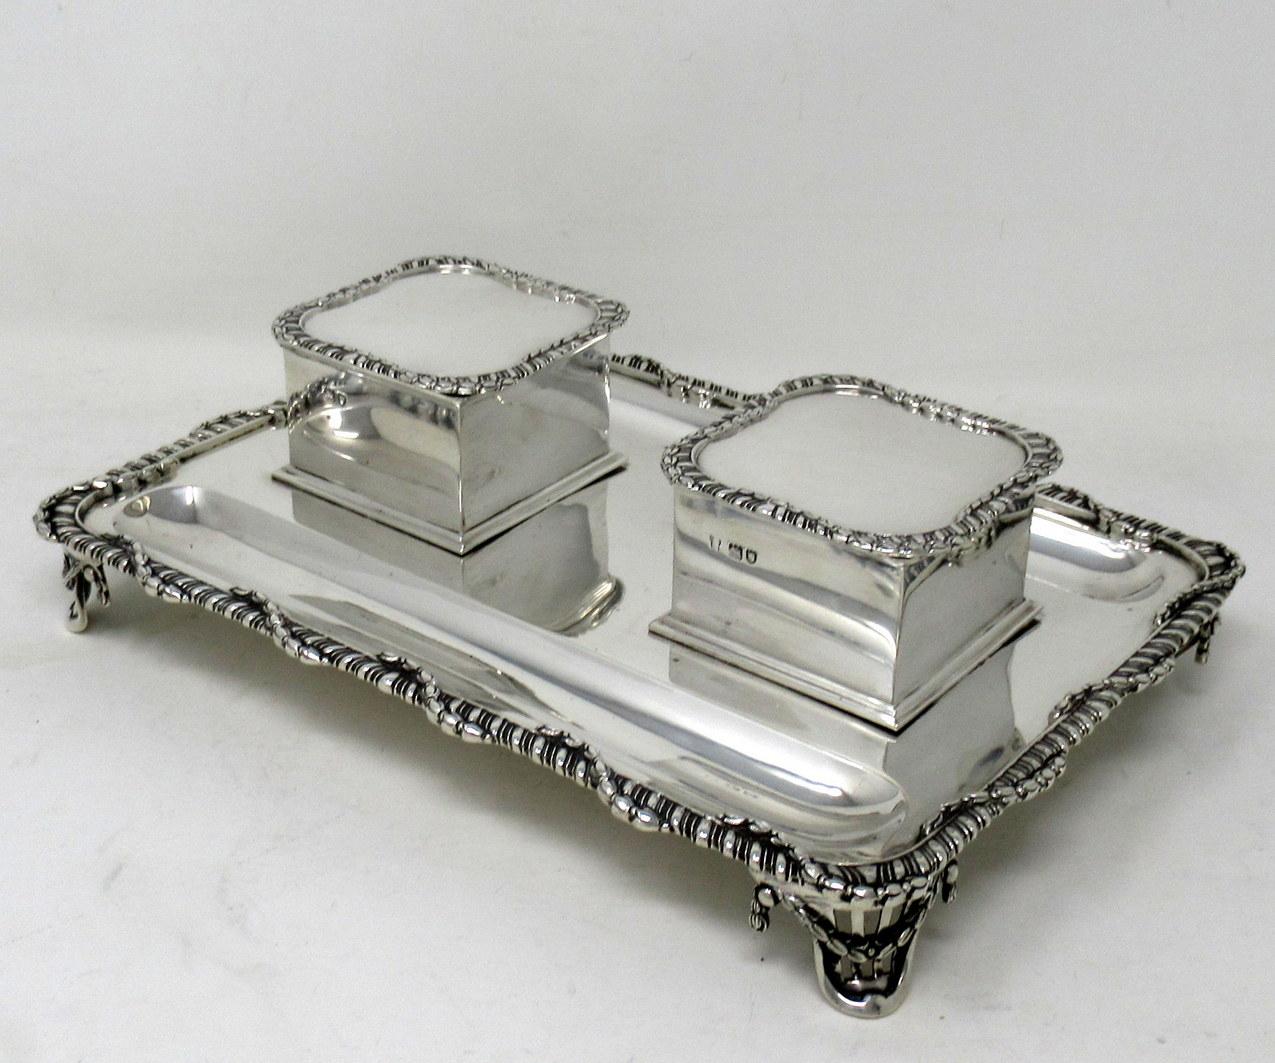 A Superb Example of an English Sterling Silver Art Deco Period Embossed twin ink bottle desk standish, complete with all its accessories to include a pair of removable silver mounted glass ink jars encased within their hinged lidded cases. 

The